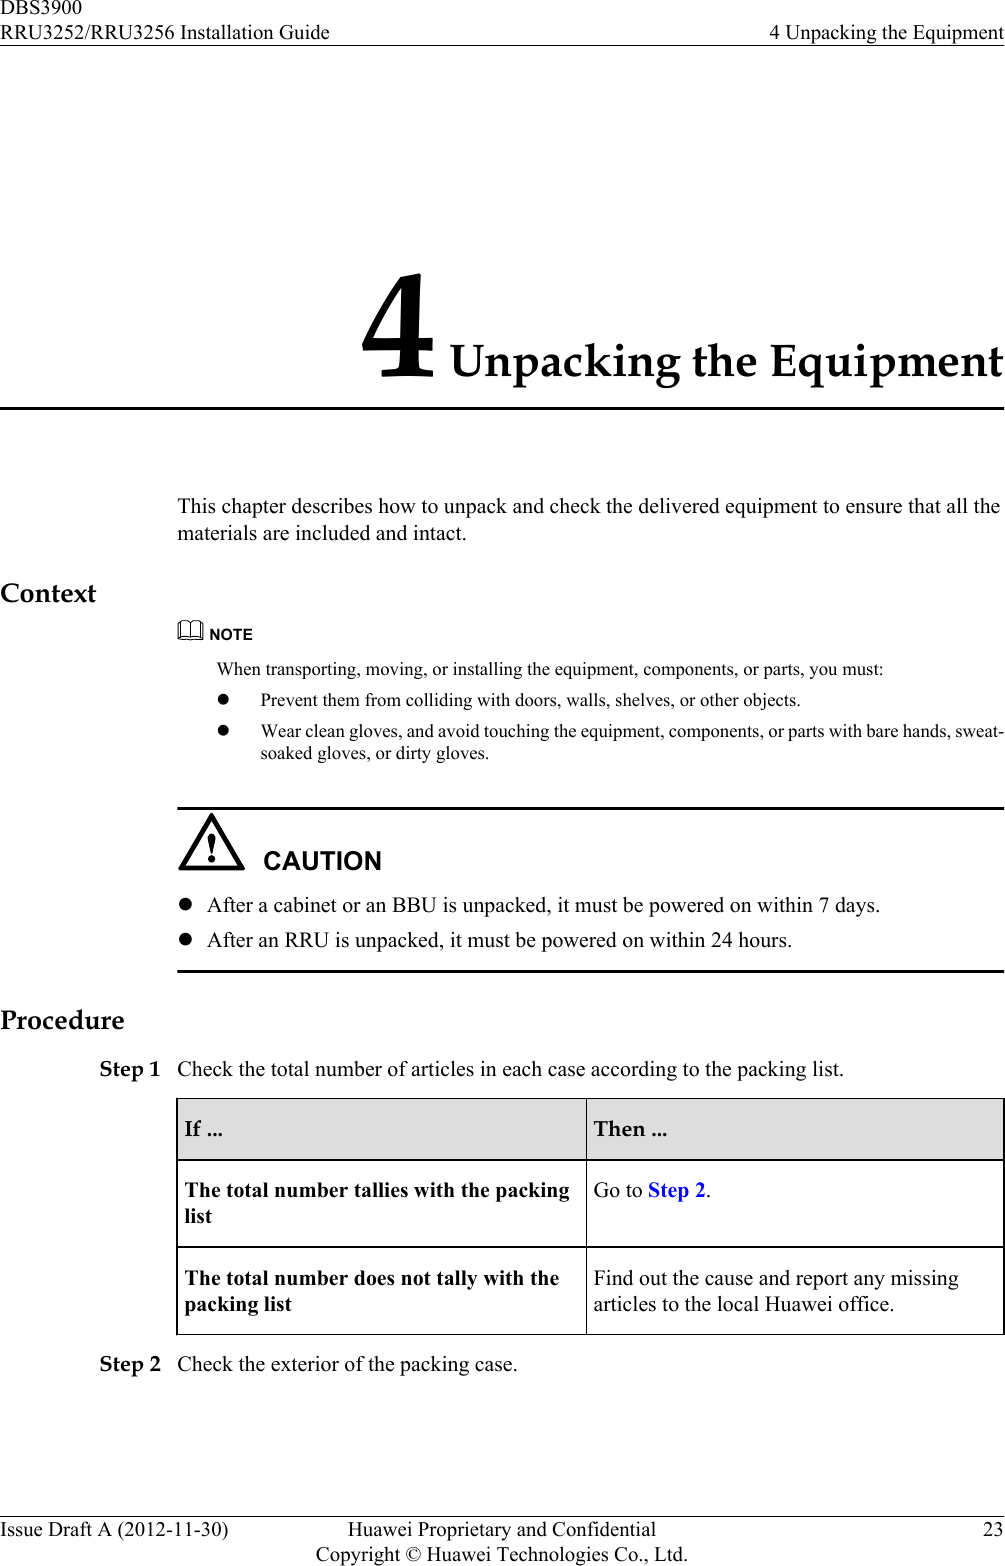 4 Unpacking the EquipmentThis chapter describes how to unpack and check the delivered equipment to ensure that all thematerials are included and intact.ContextNOTEWhen transporting, moving, or installing the equipment, components, or parts, you must:lPrevent them from colliding with doors, walls, shelves, or other objects.lWear clean gloves, and avoid touching the equipment, components, or parts with bare hands, sweat-soaked gloves, or dirty gloves.CAUTIONlAfter a cabinet or an BBU is unpacked, it must be powered on within 7 days.lAfter an RRU is unpacked, it must be powered on within 24 hours.ProcedureStep 1 Check the total number of articles in each case according to the packing list.If ... Then ...The total number tallies with the packinglistGo to Step 2.The total number does not tally with thepacking listFind out the cause and report any missingarticles to the local Huawei office.Step 2 Check the exterior of the packing case.DBS3900RRU3252/RRU3256 Installation Guide 4 Unpacking the EquipmentIssue Draft A (2012-11-30) Huawei Proprietary and ConfidentialCopyright © Huawei Technologies Co., Ltd.23